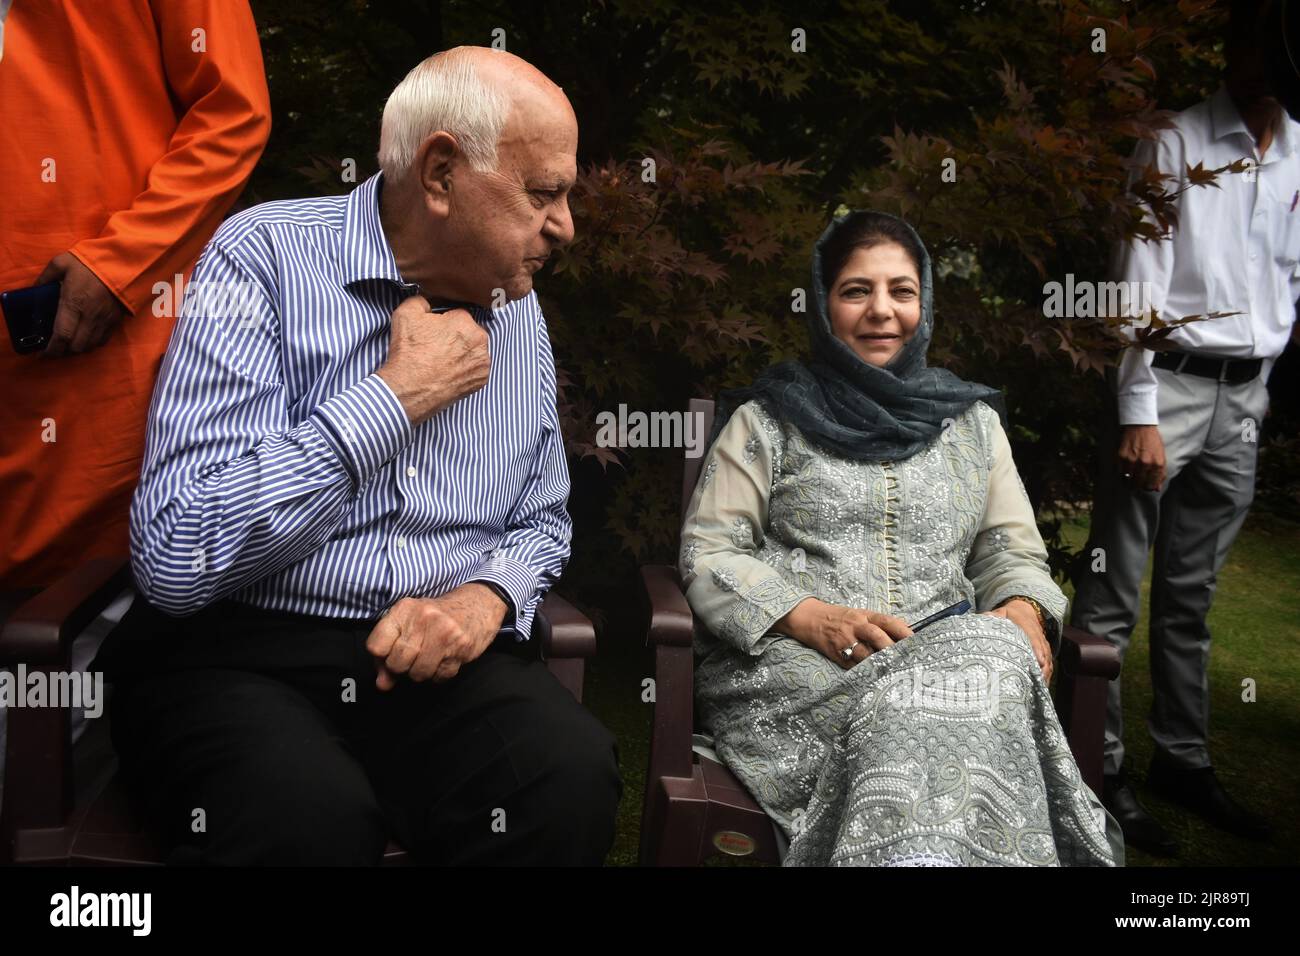 Srinagar, Jammu And Kashmir, India. 22nd Aug, 2022. All Party meeting in Srinagar. Former Jammu and Kashmir Chief Minister and National Conference President Farooq Abdullah interaction with Leaders of various political parties at his Srinagar's residence before a press conference in Srinagar, the summer capital of India Kashmir. Farooq Abdullah convened an all-party meeting over the inclusion of outside voters in J&K's electoral rolls. The meeting at his Srinagar was attended by former Chief minister Mehbooba Mufti and other top leaders of various political parties. (Credit Image: © Mubashir Stock Photo